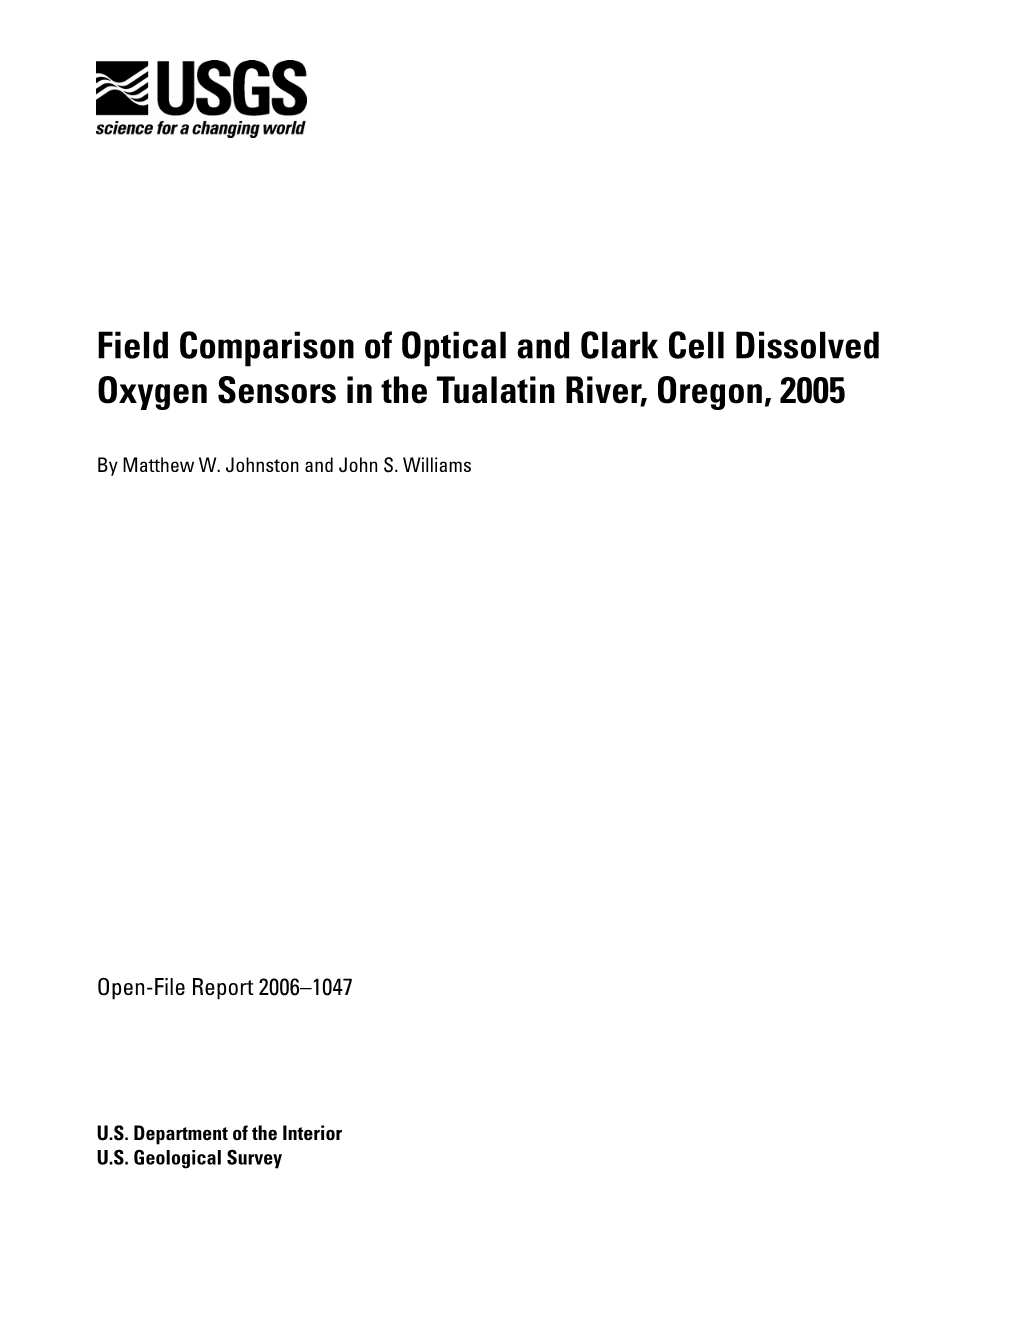 Field Comparison of Optical and Clark Cell Dissolved Oxygen Sensors in the Tualatin River, Oregon, 2005